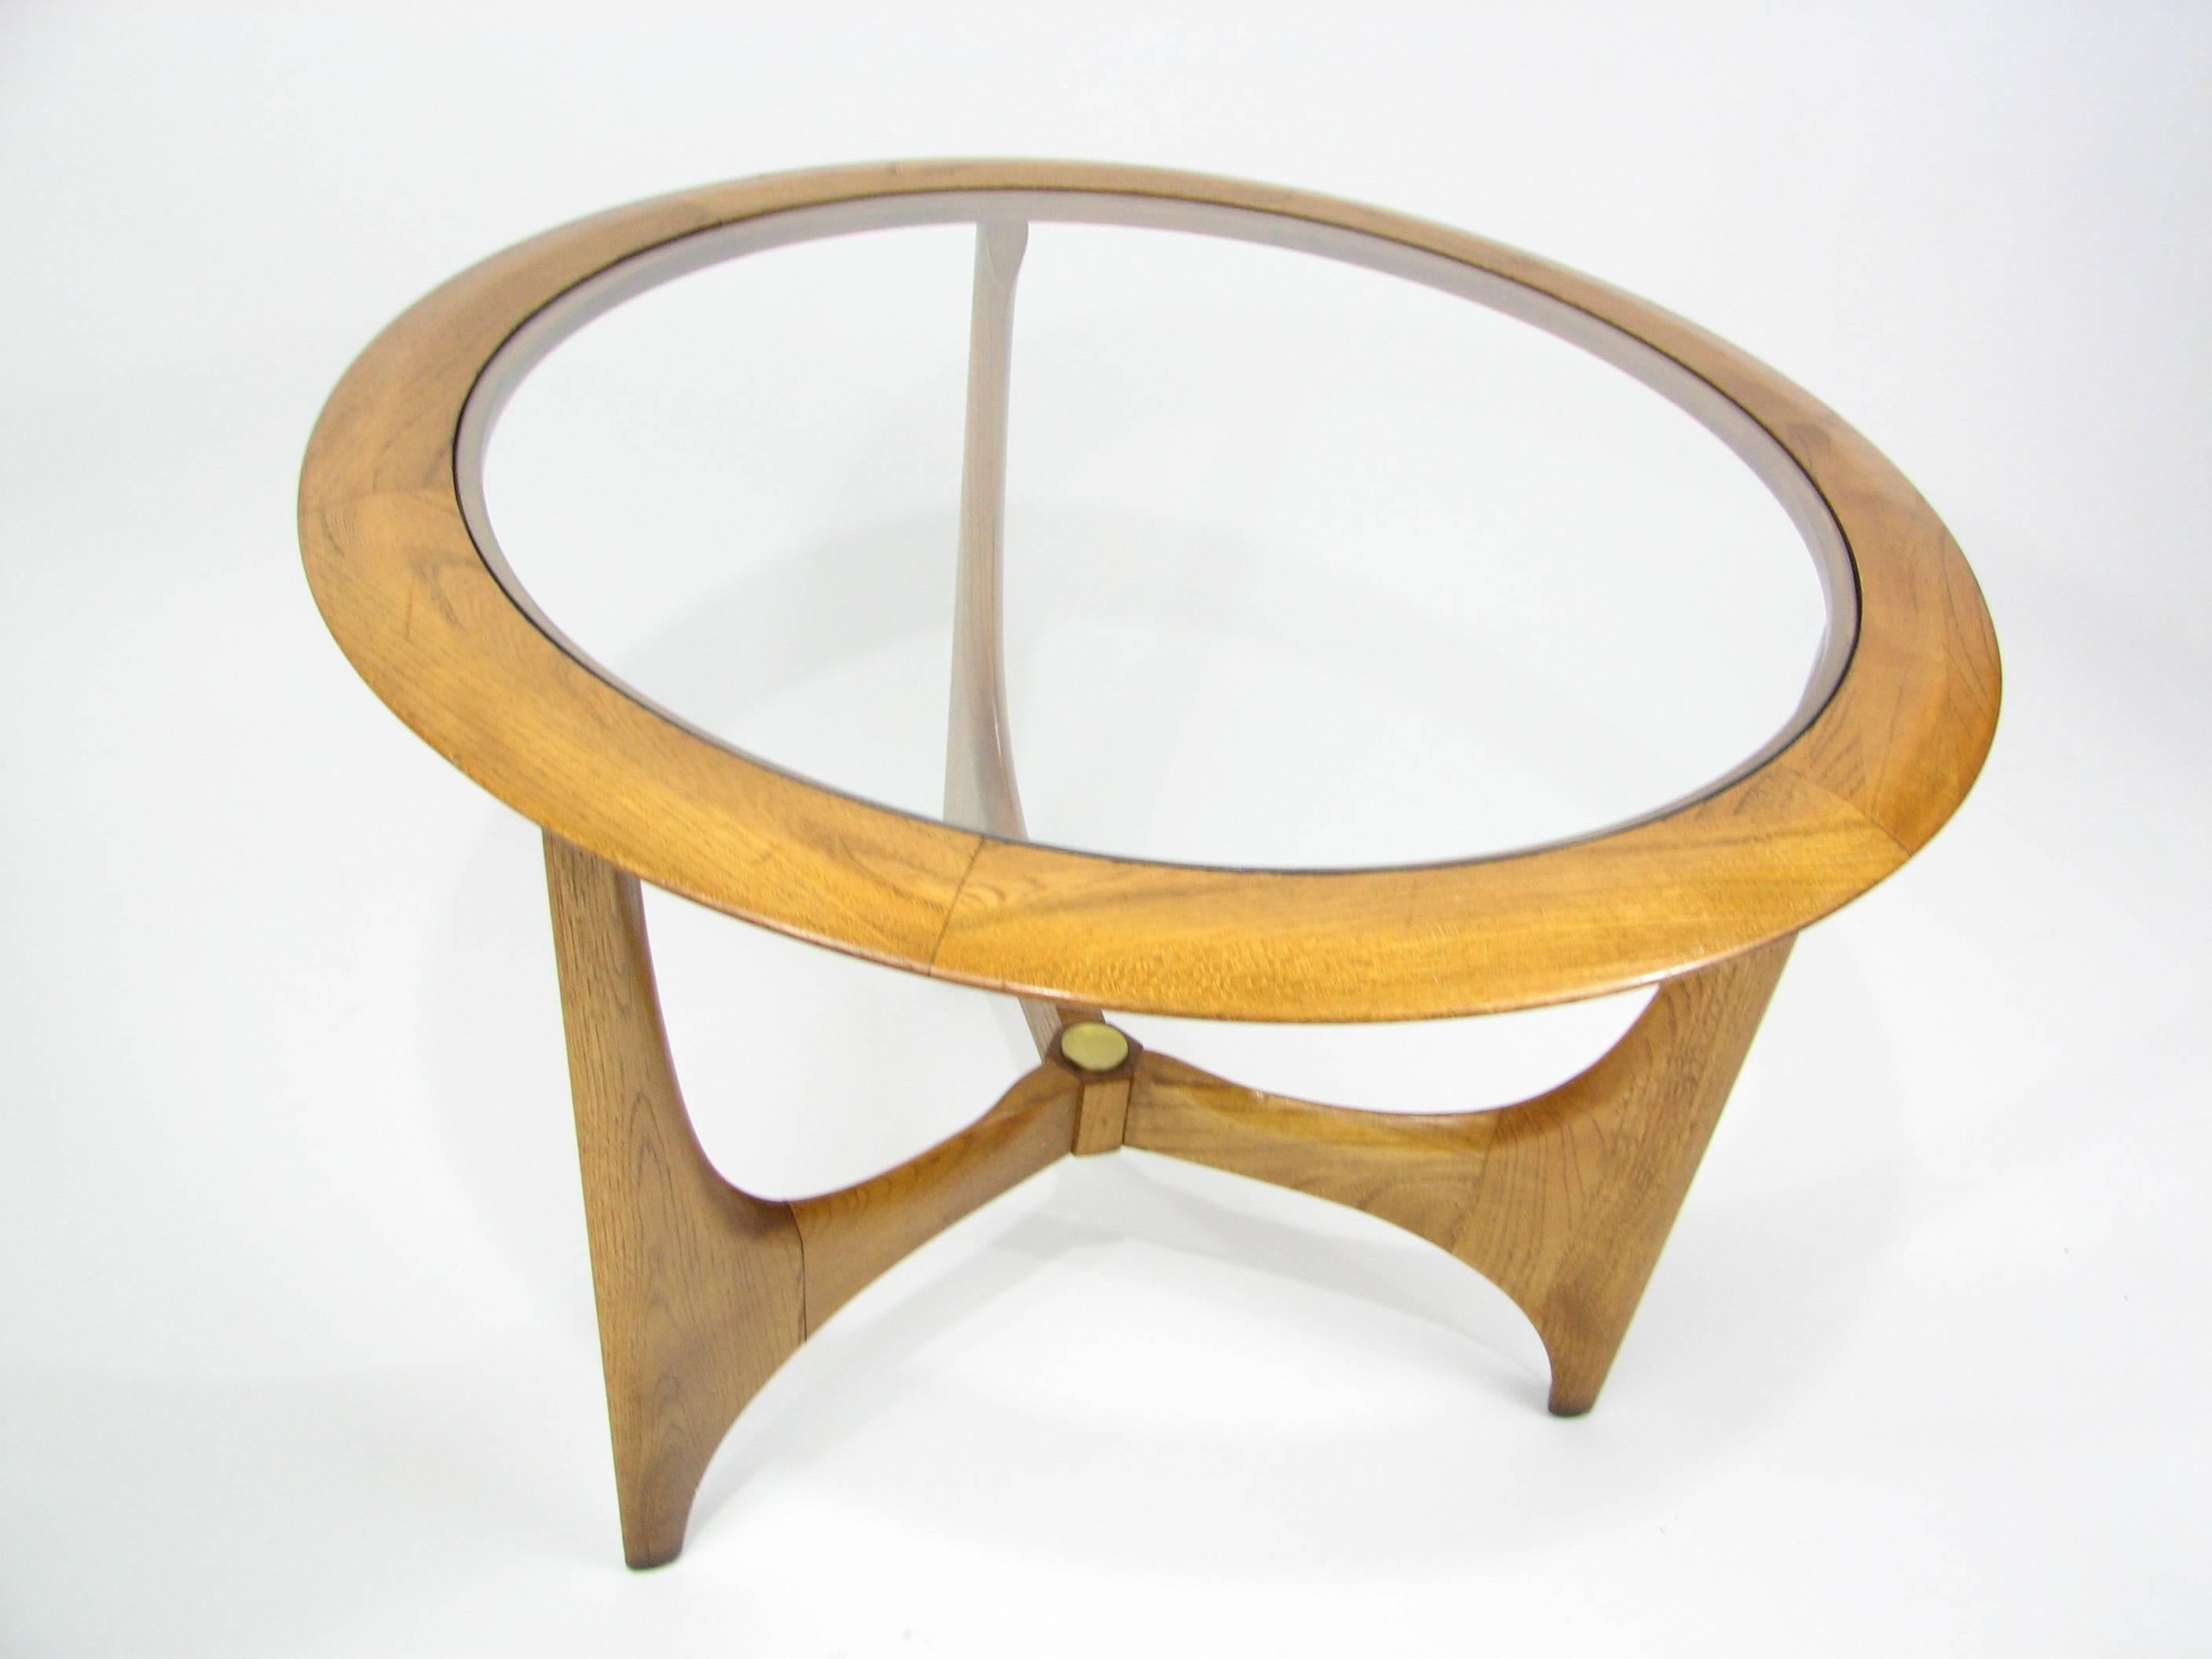 This beautiful round Mid-Century side table by Lane is made of walnut with a brass medallion accent at the center intersection of the legs. 

Light original finish. The glass top is in excellent condition.

There is a minor nick on one “arm” of